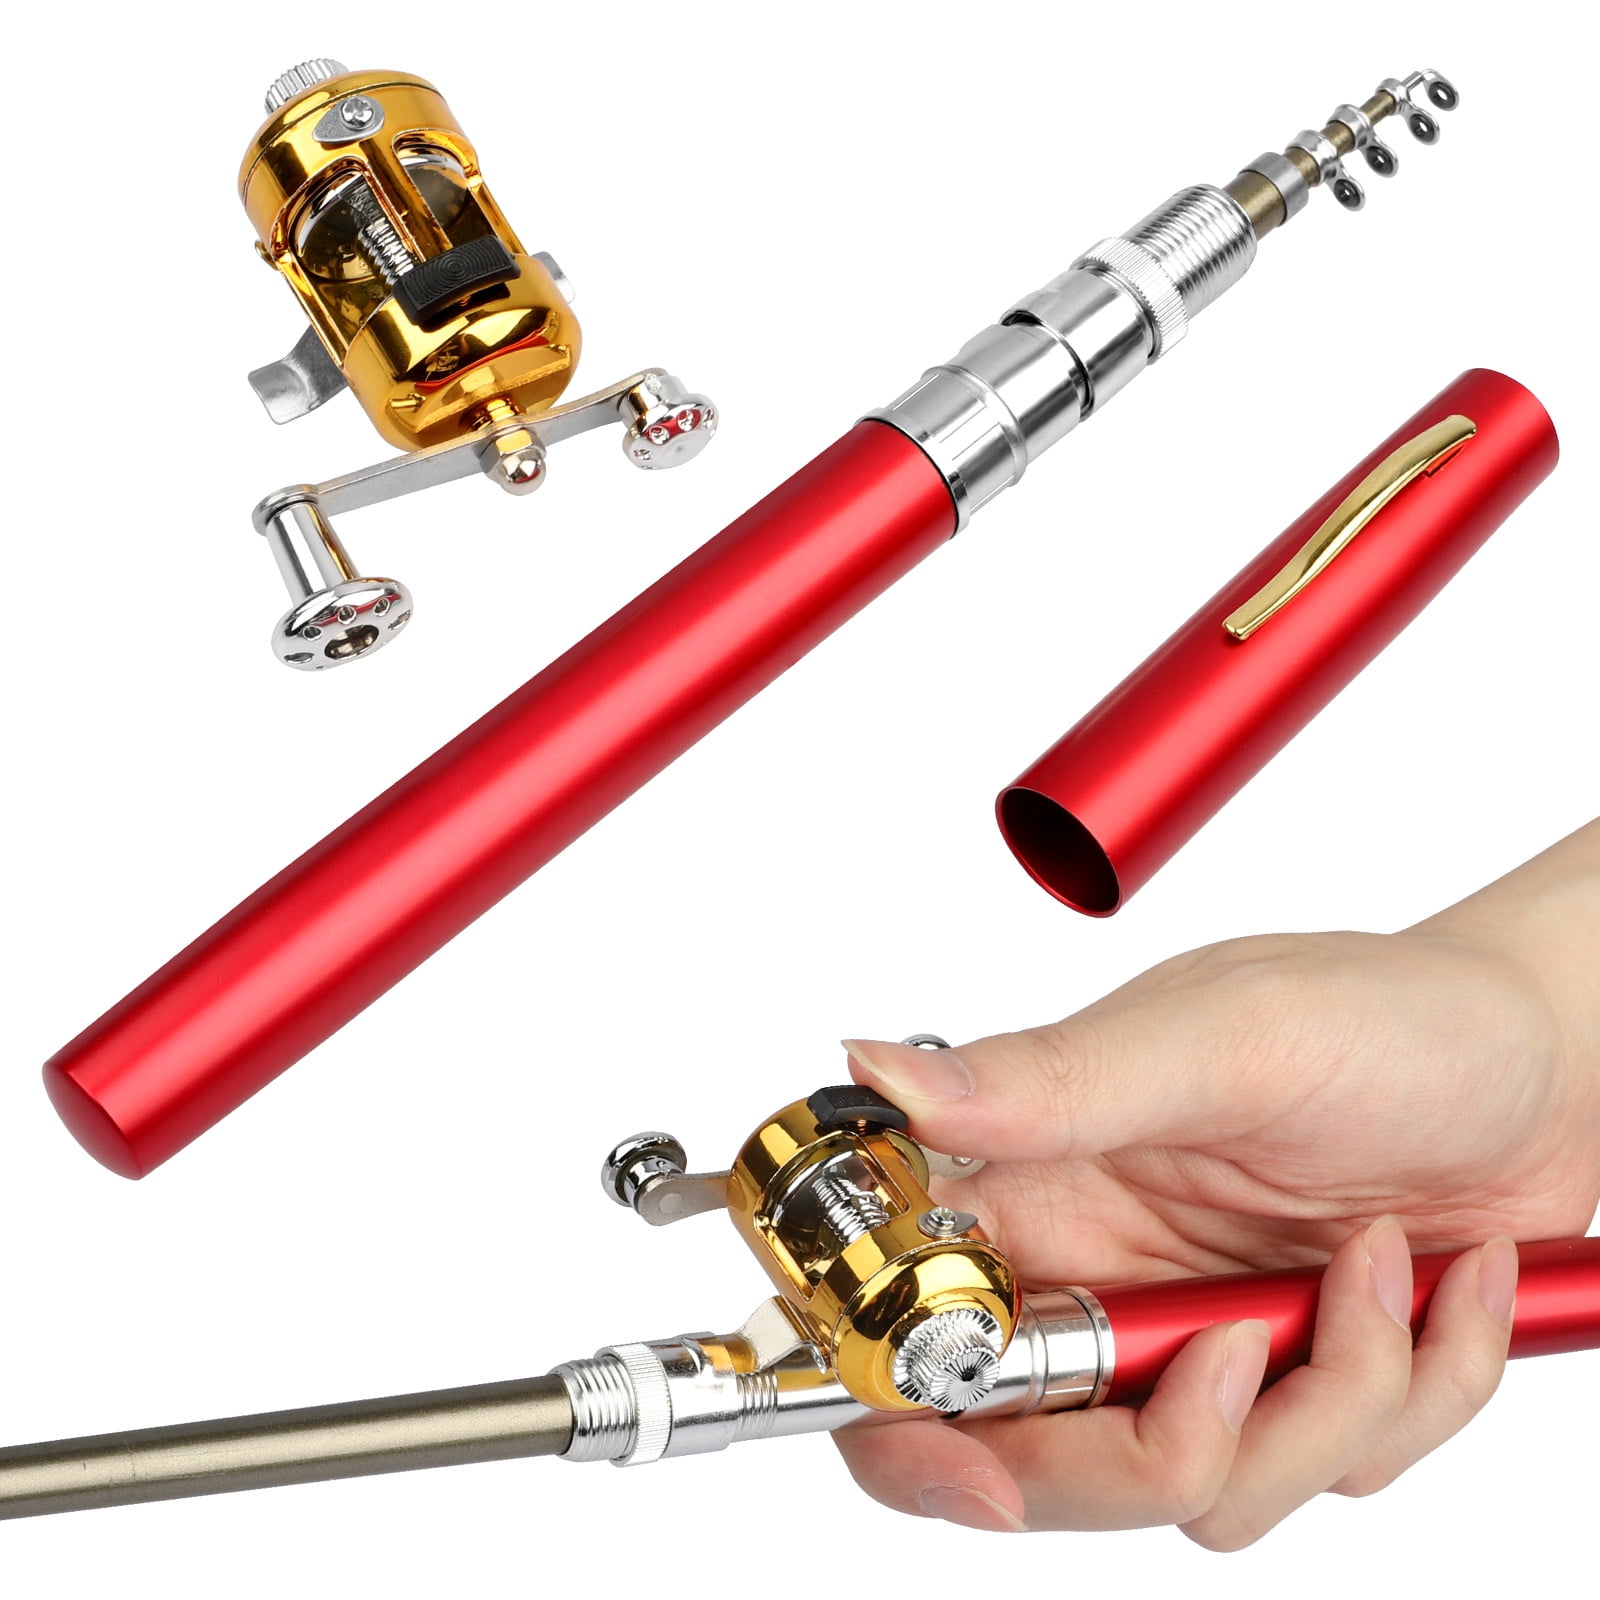 Pocket Fisherman Foldable Pocket Fishing Rod Pocket Size Telescopic Fishing  Rod With Integrated Design Compact And Portable - AliExpress